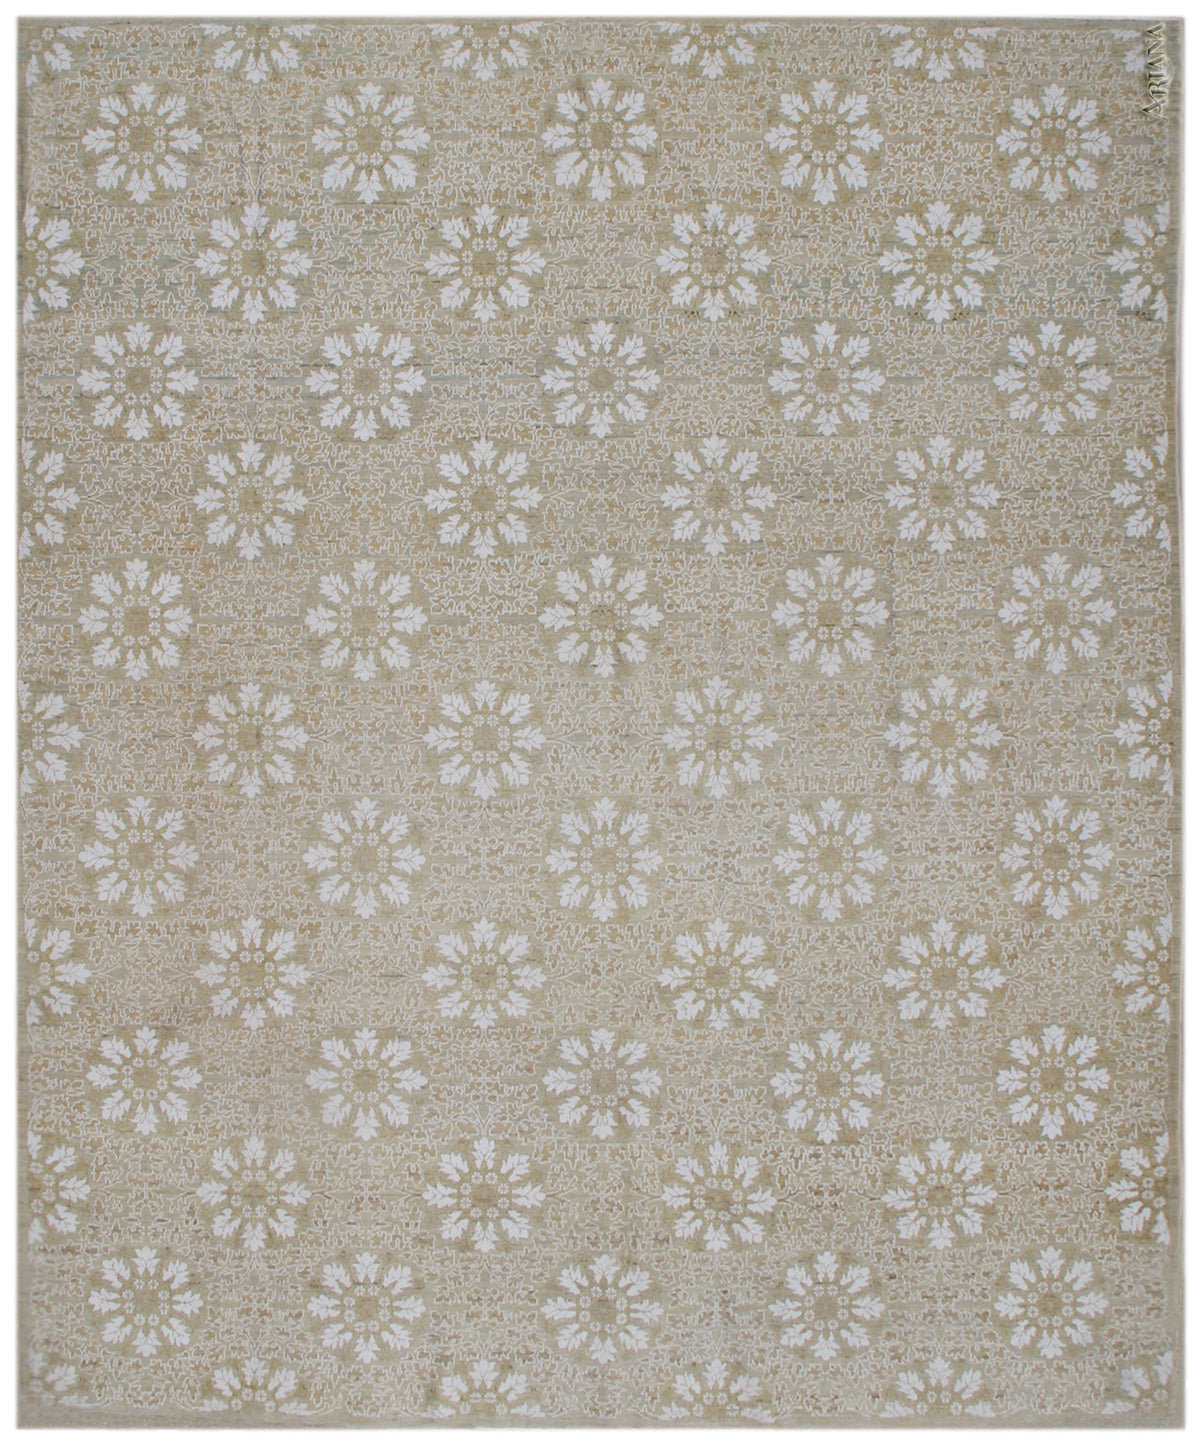 8'x10' Soft Color with Pop of Stark White Ariana Transitional Area Rug